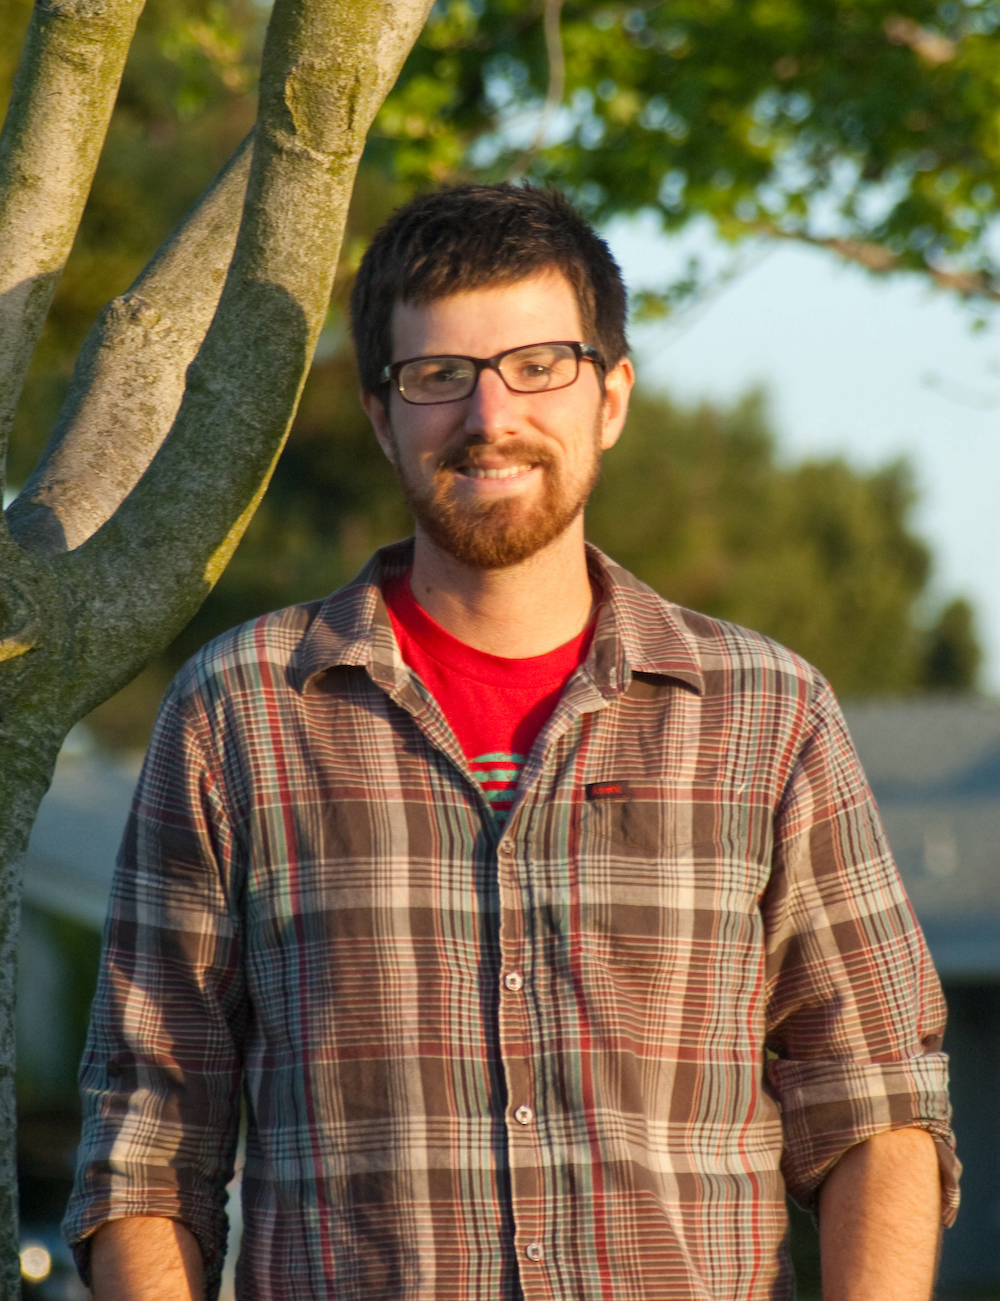 A man standing outside in a red check shirt and glasses